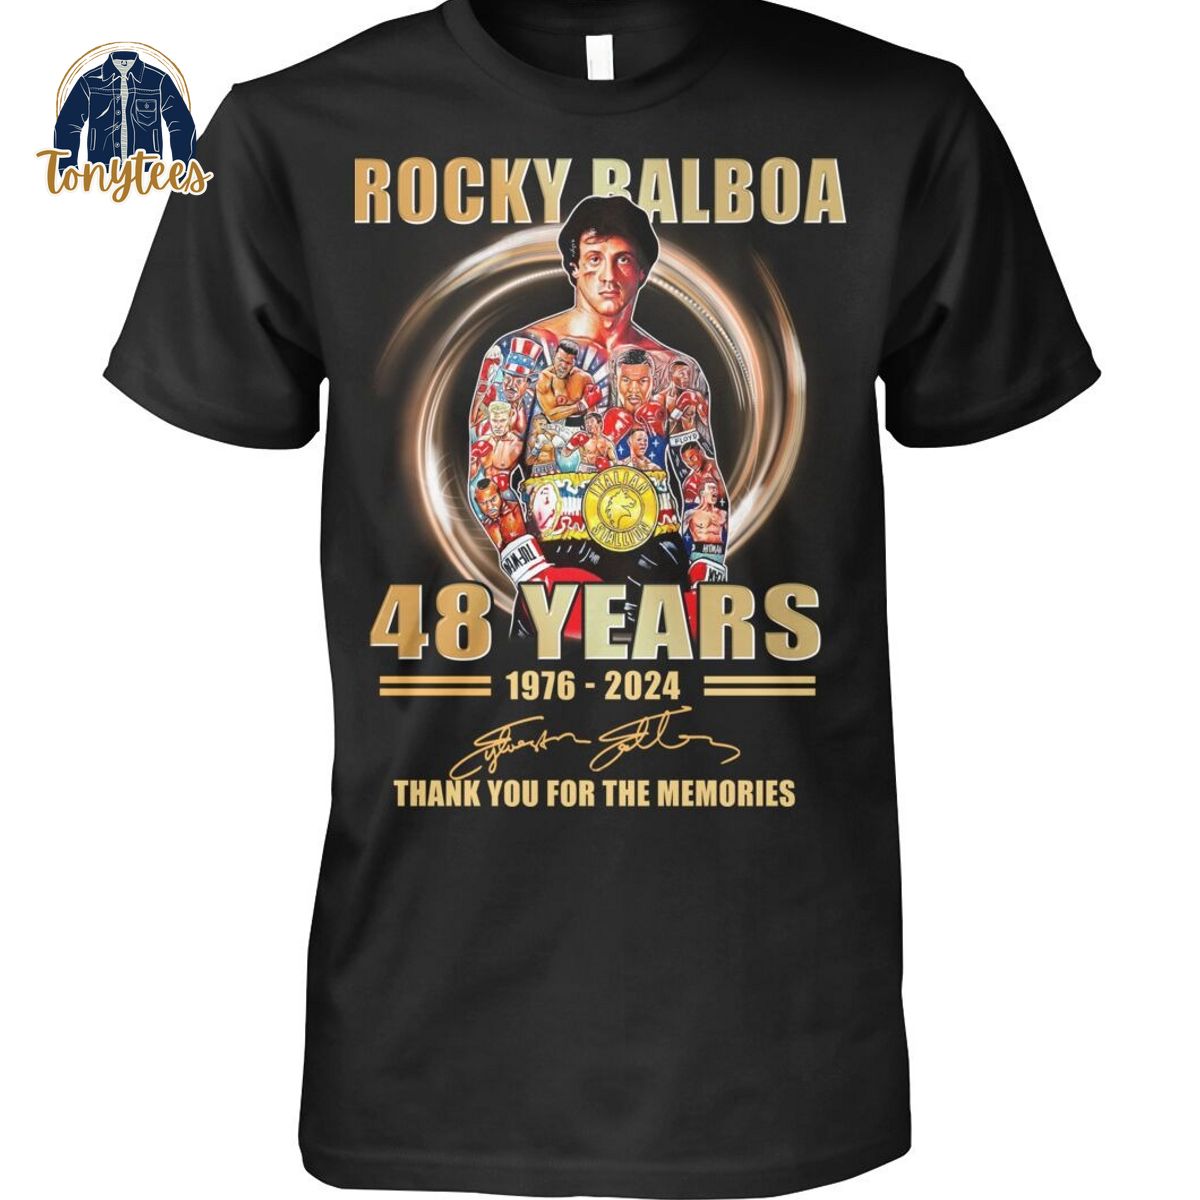 Rocky Raboa 48 years thank you for the memories shirt